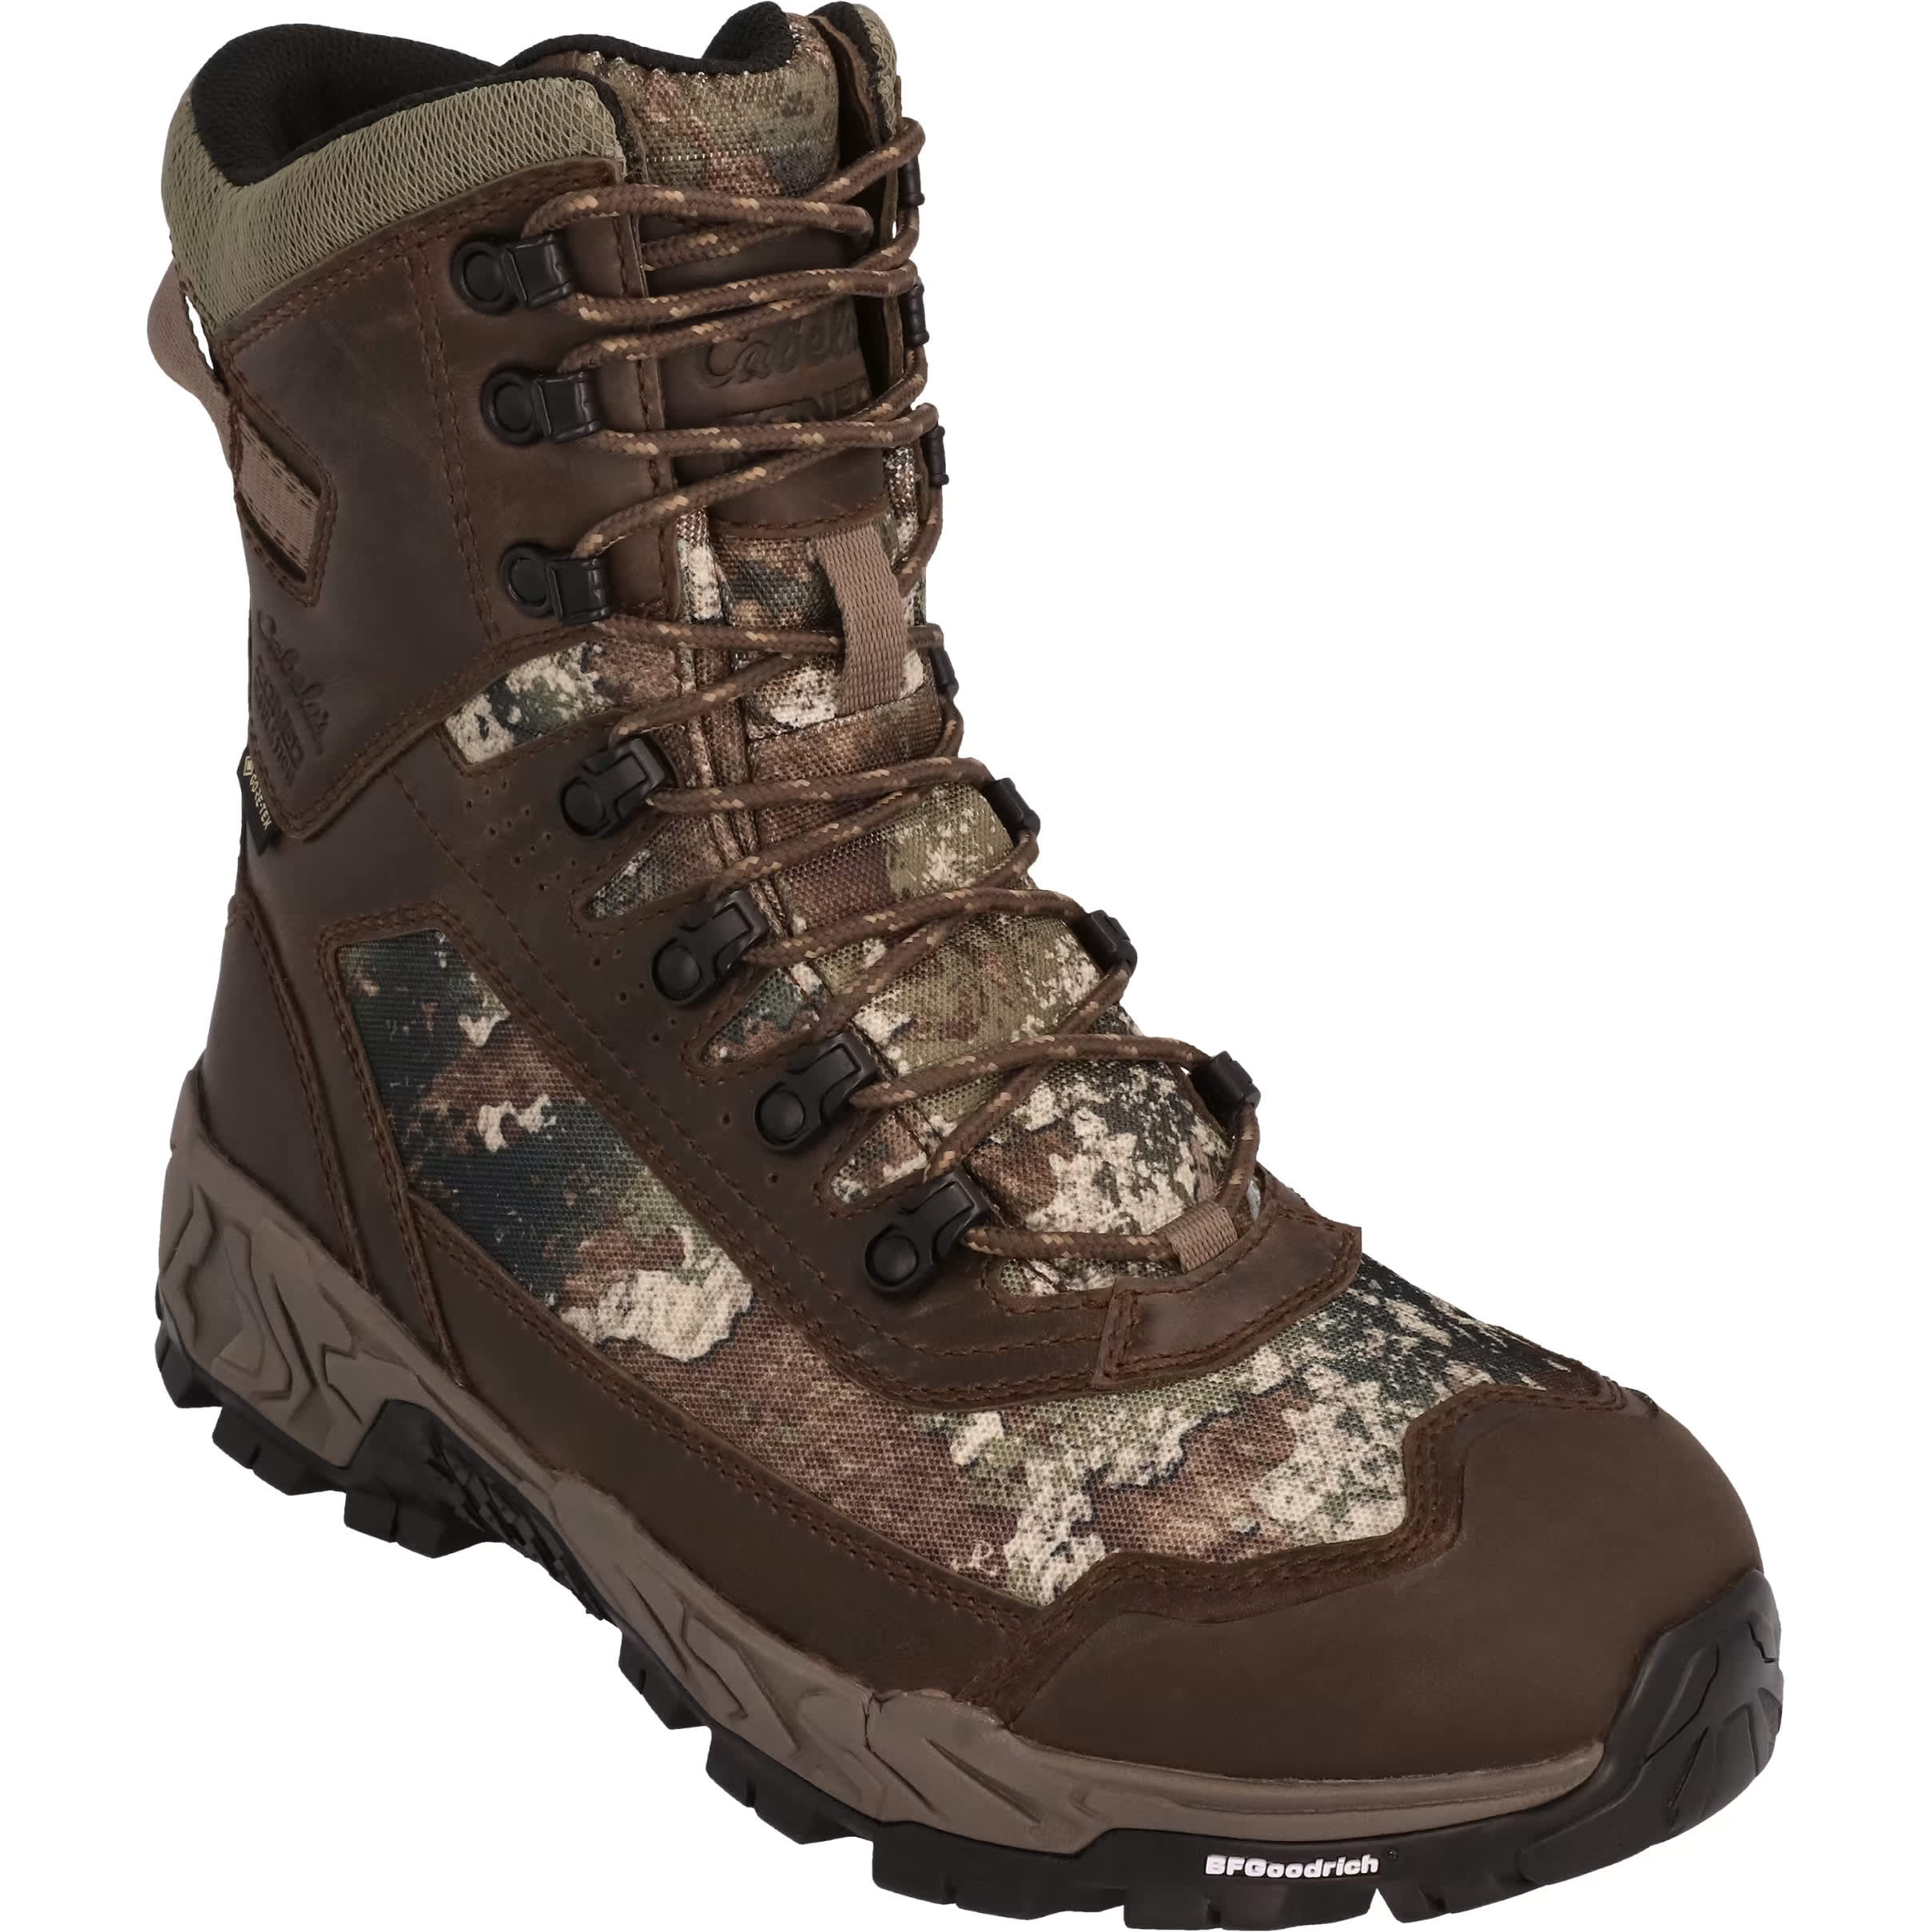 Cabela’s® Men’s Treadfast 2.0 GORE-TEX® Insulated Hunting Boots